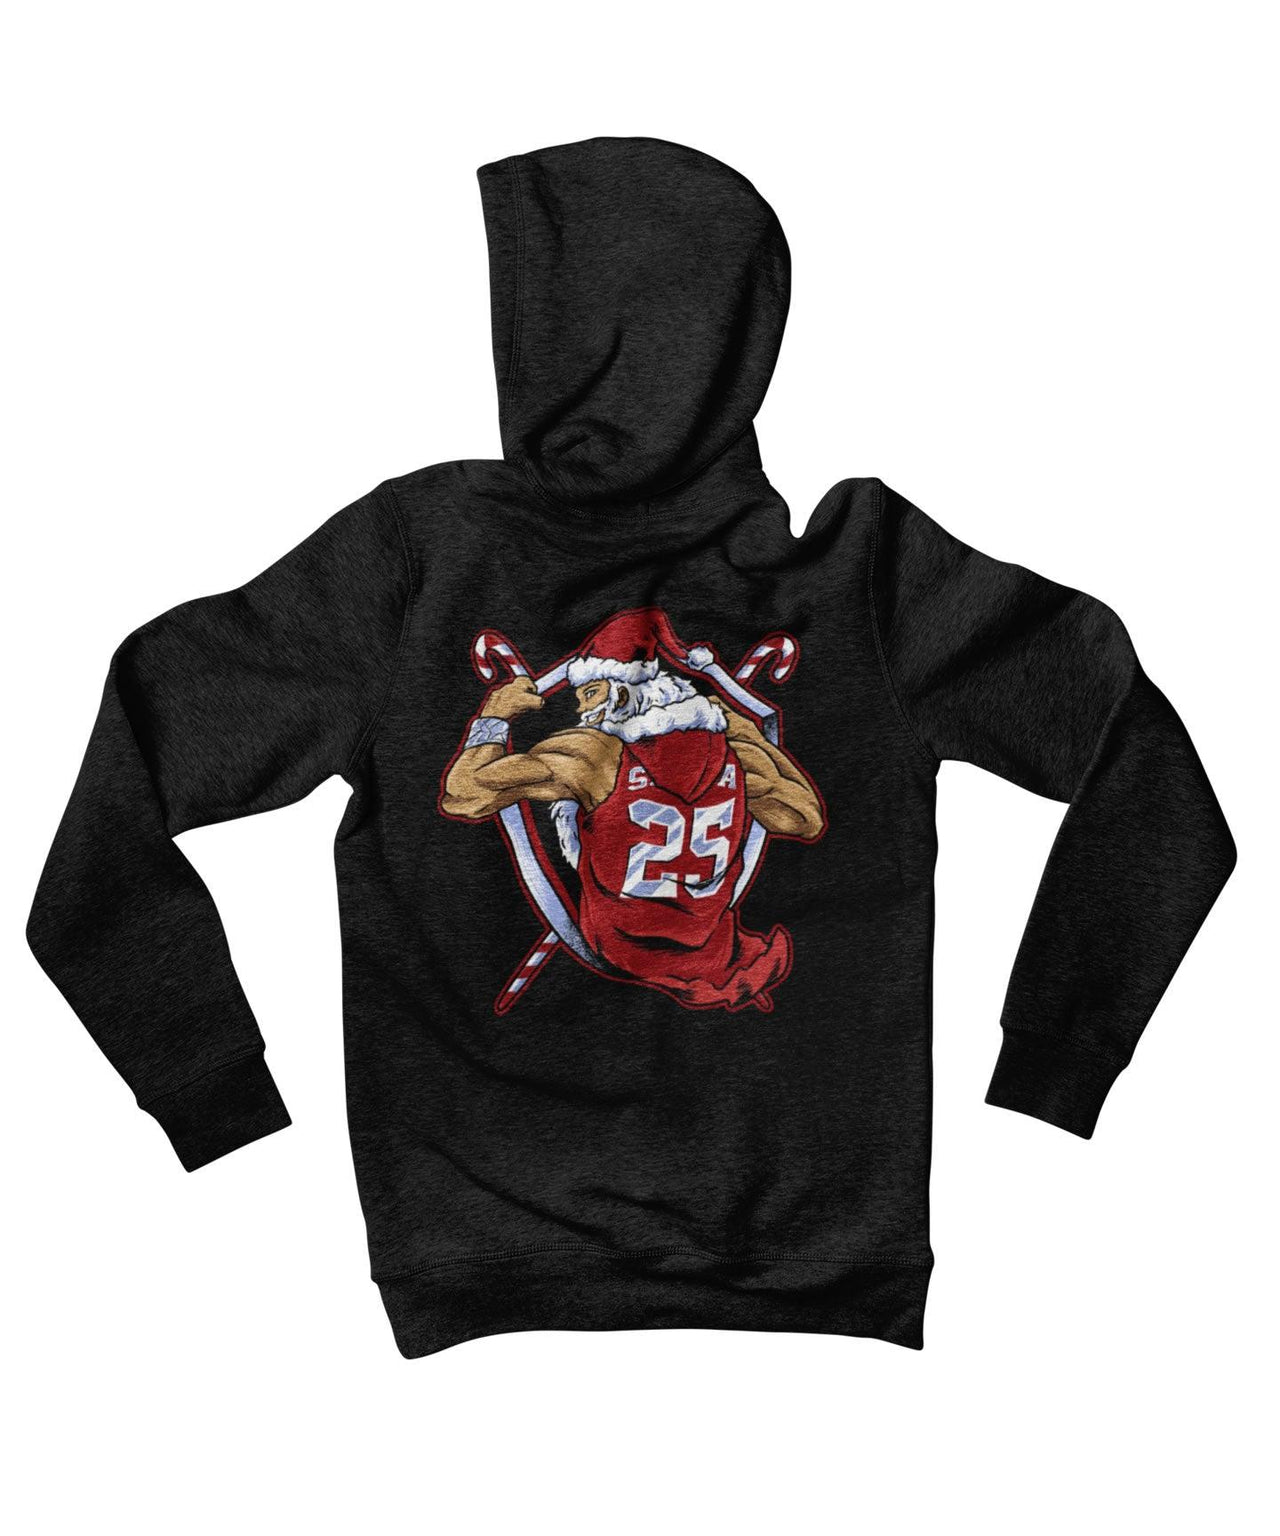 Athletic Old Man Santa Back Printed Christmas Hoodie For Men and Women 8Ball